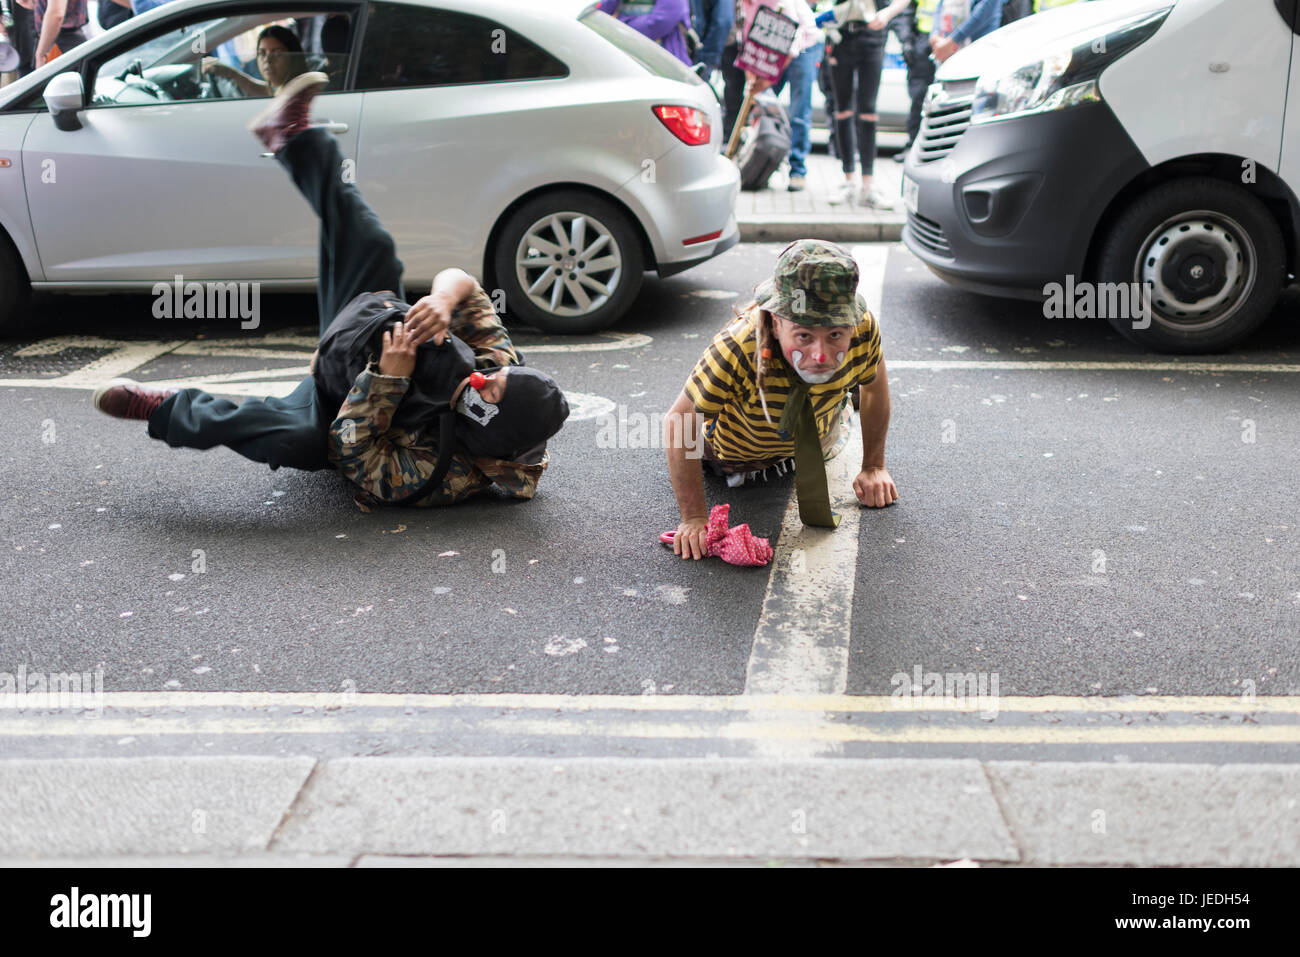 London, UK, 24th June 2017. Unite Against Fascism (UAF) has organized a demonstration near Trafalgar Square against the English Defence League (EDL). Due to recent terrorist attacks, there’s a heavy police presence. Credit: onebluelight.com/Alamy Live News Stock Photo